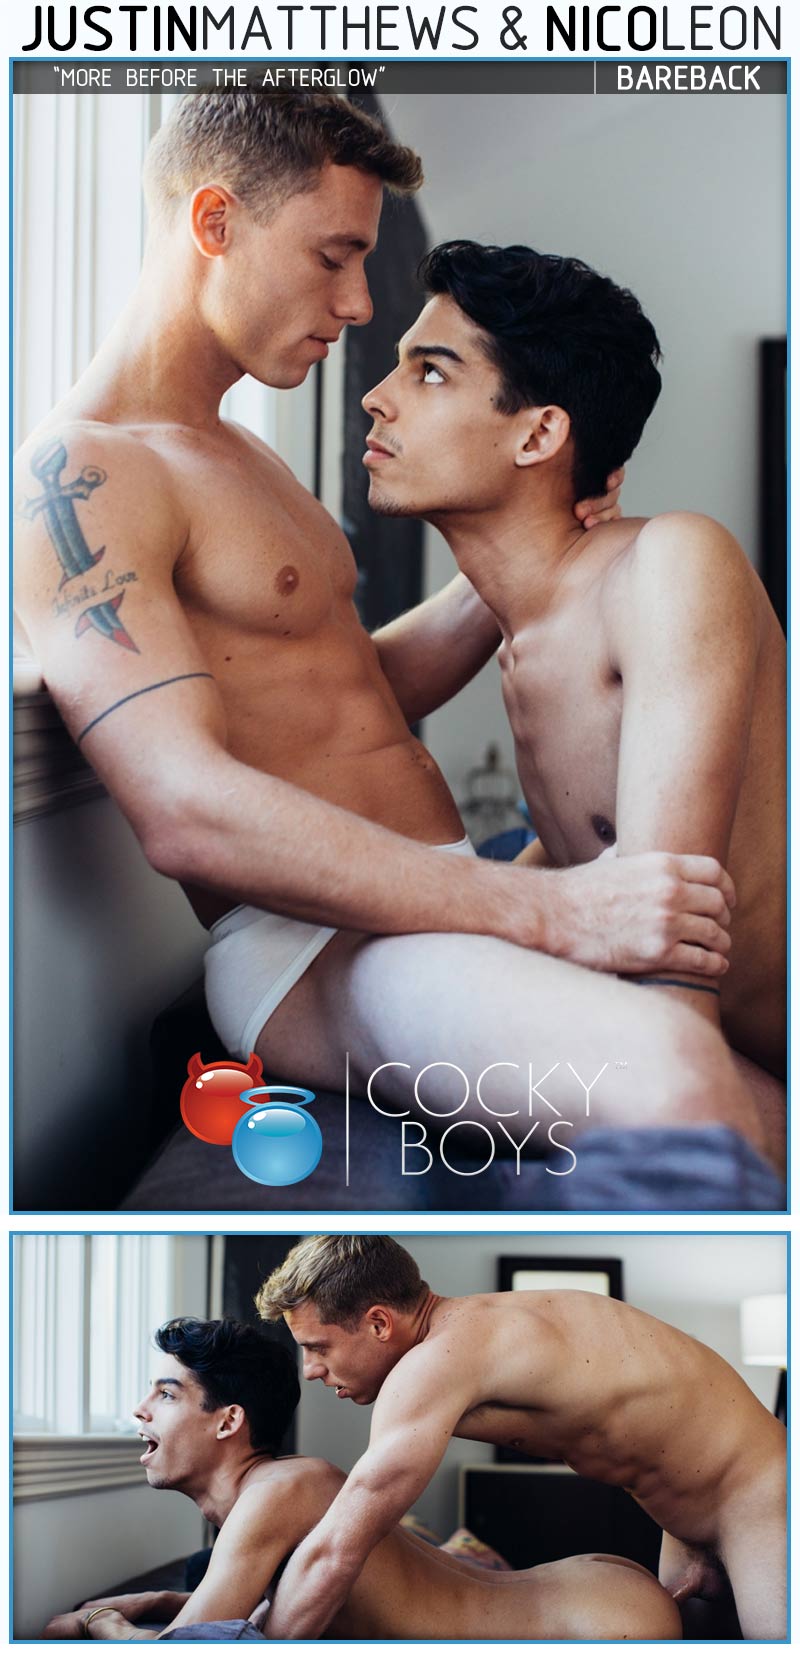 More Before The Afterglow (Justin Matthews Fucks Nico Leon) at CockyBoys.com